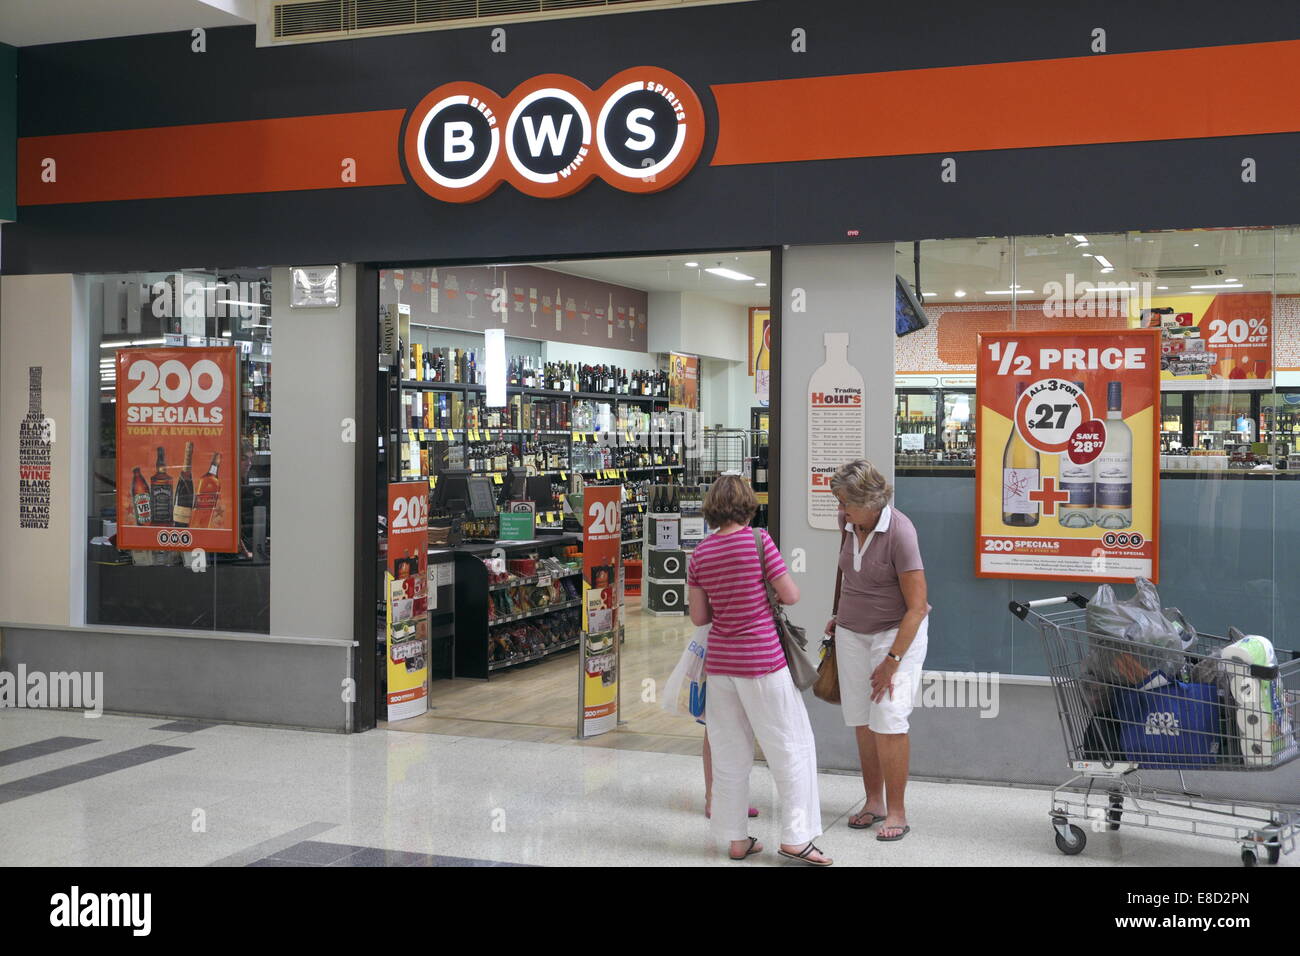 Bws Beers Wines Spirits Store Off Licence Liquor Shop In North Stock Photo Alamy